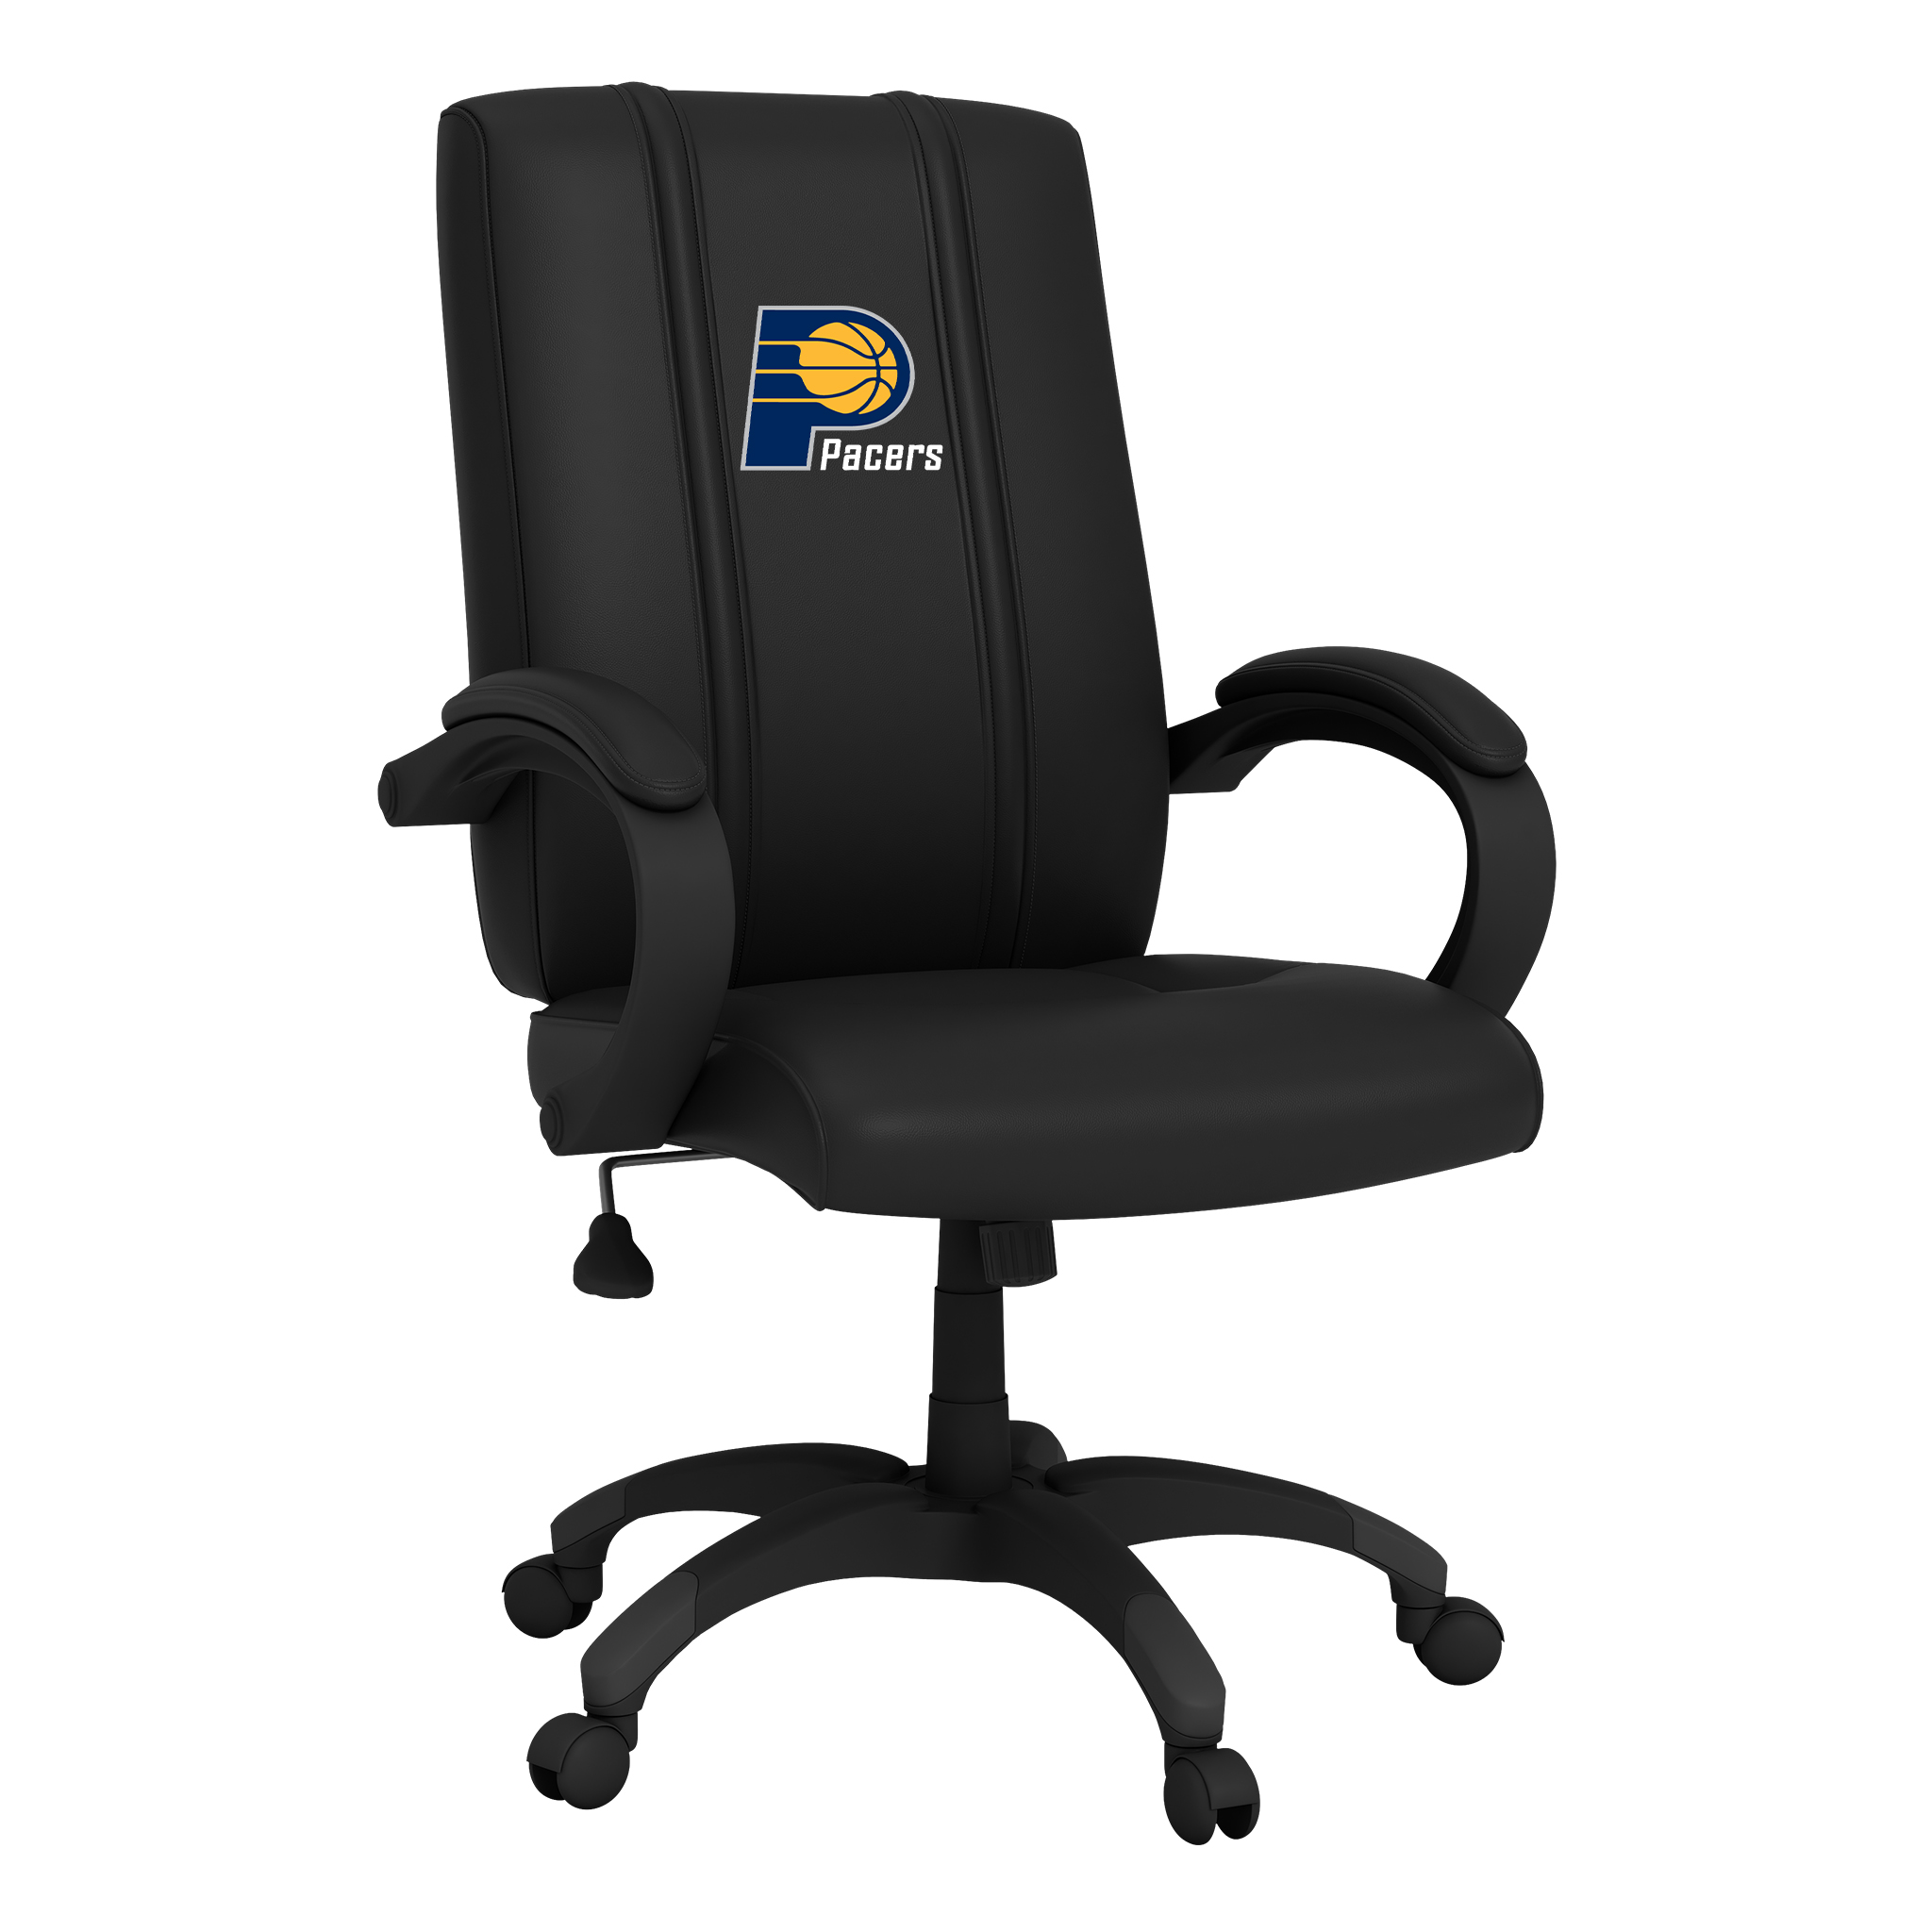 Indiana Pacers Office Chair 1000 Indiana Pacers Logo